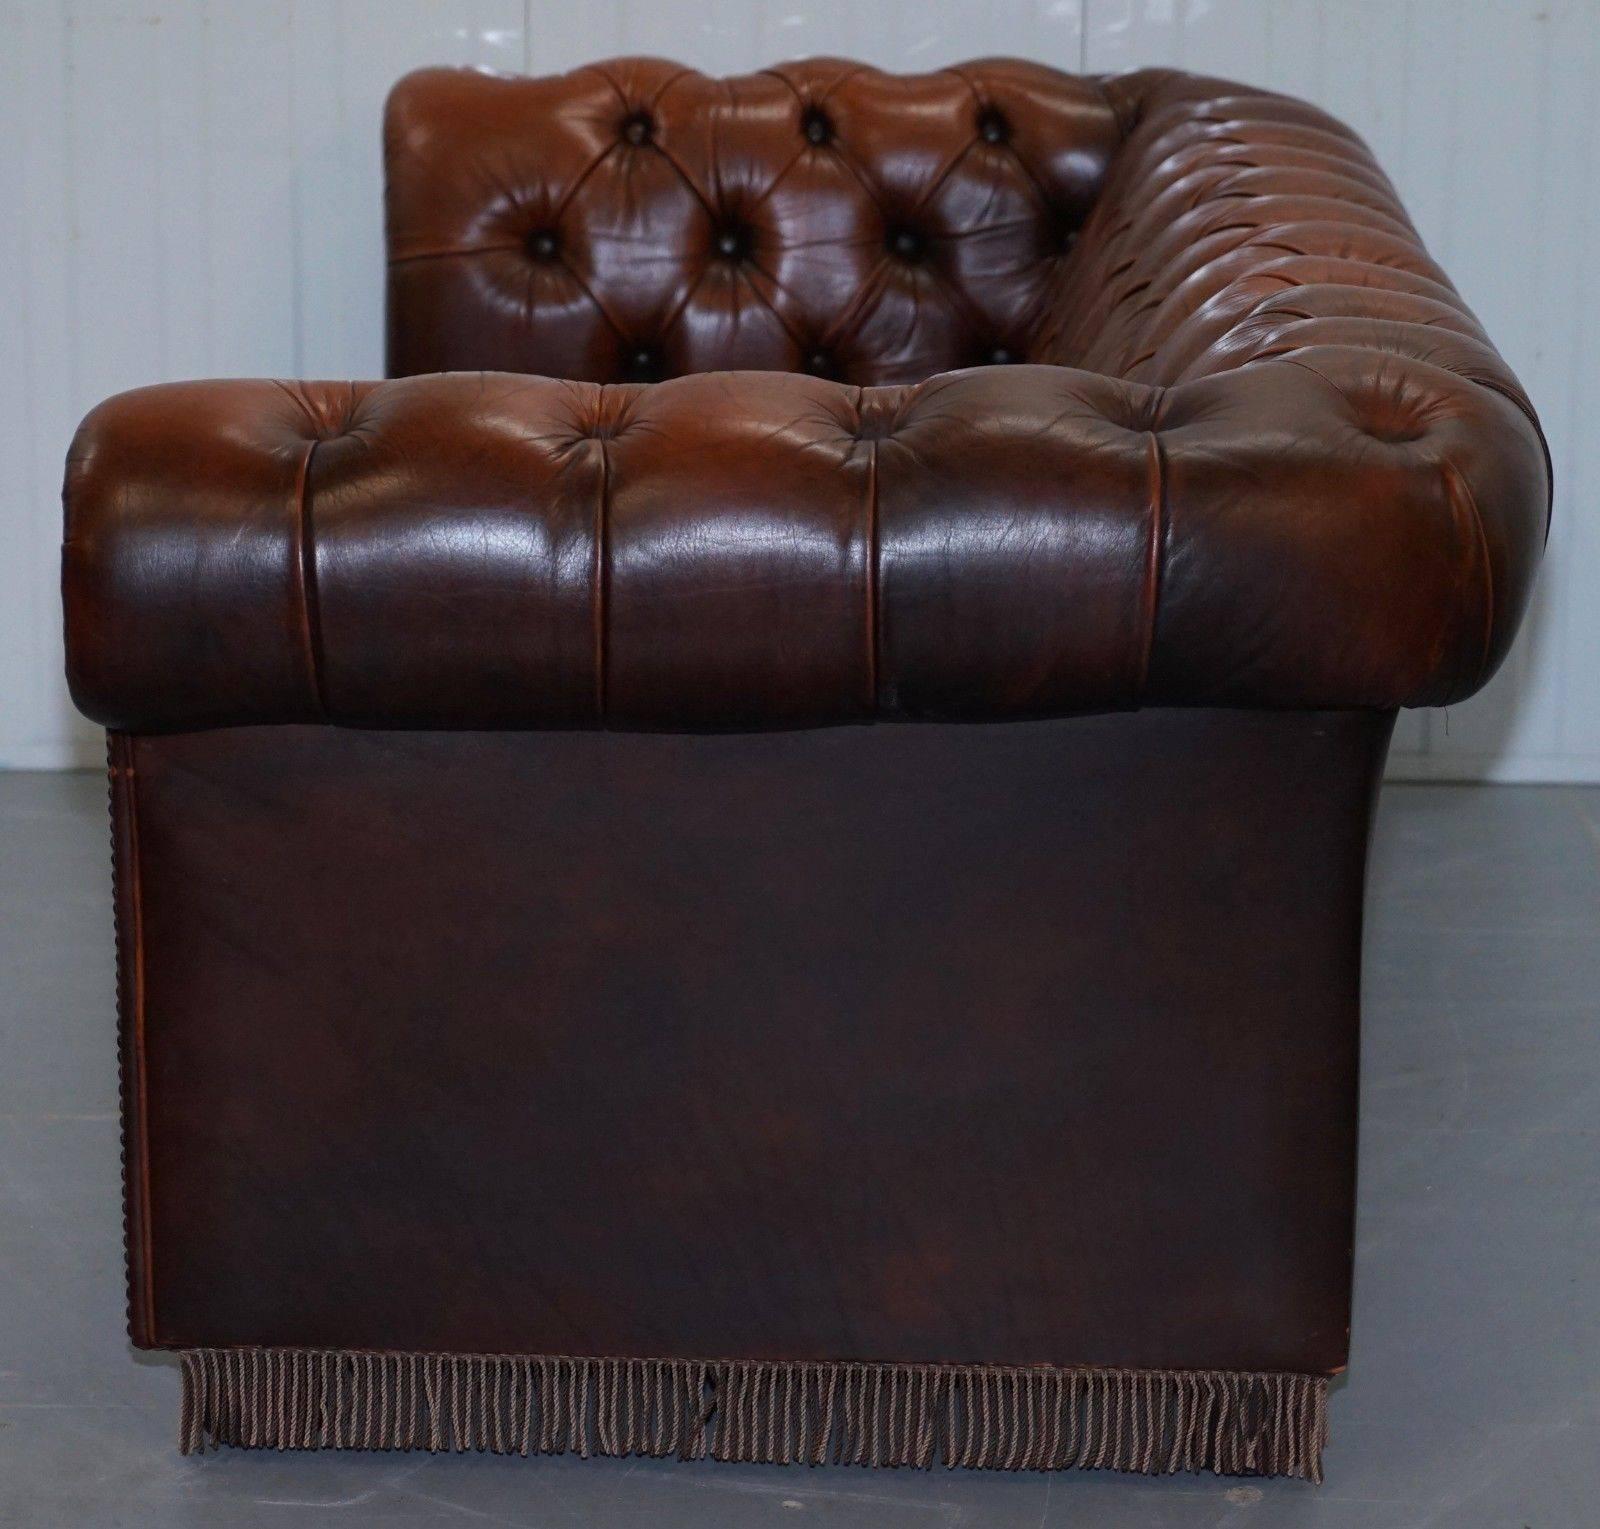 20th Century Original Vintage Hand-Dyed Aged Brown Leather Chesterfield Sofabed Rare Find